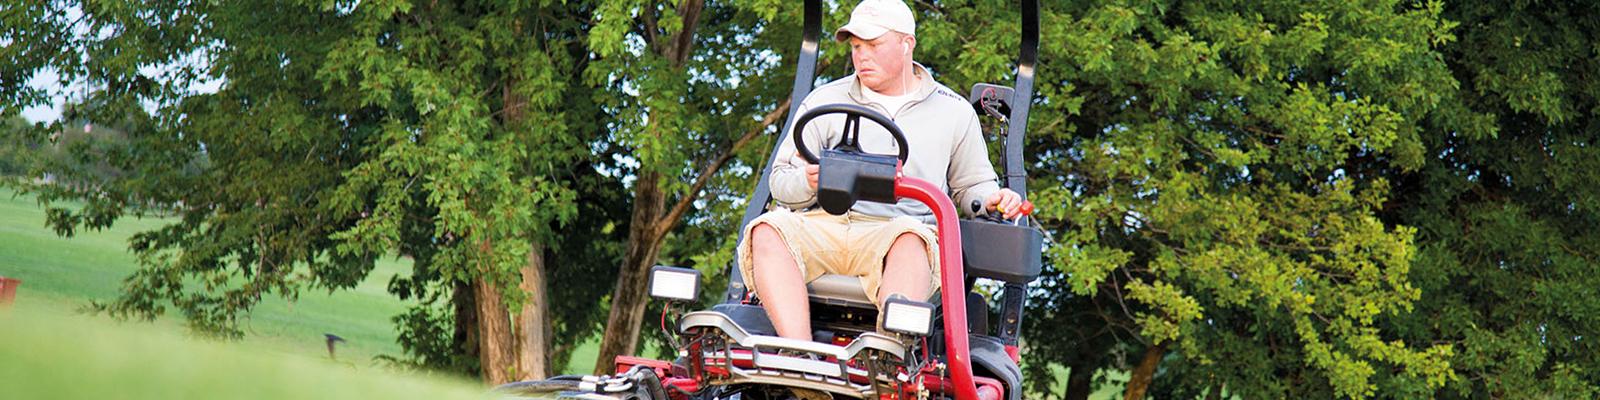 Man on large riding lawnmower, trimming grass on a golf course.